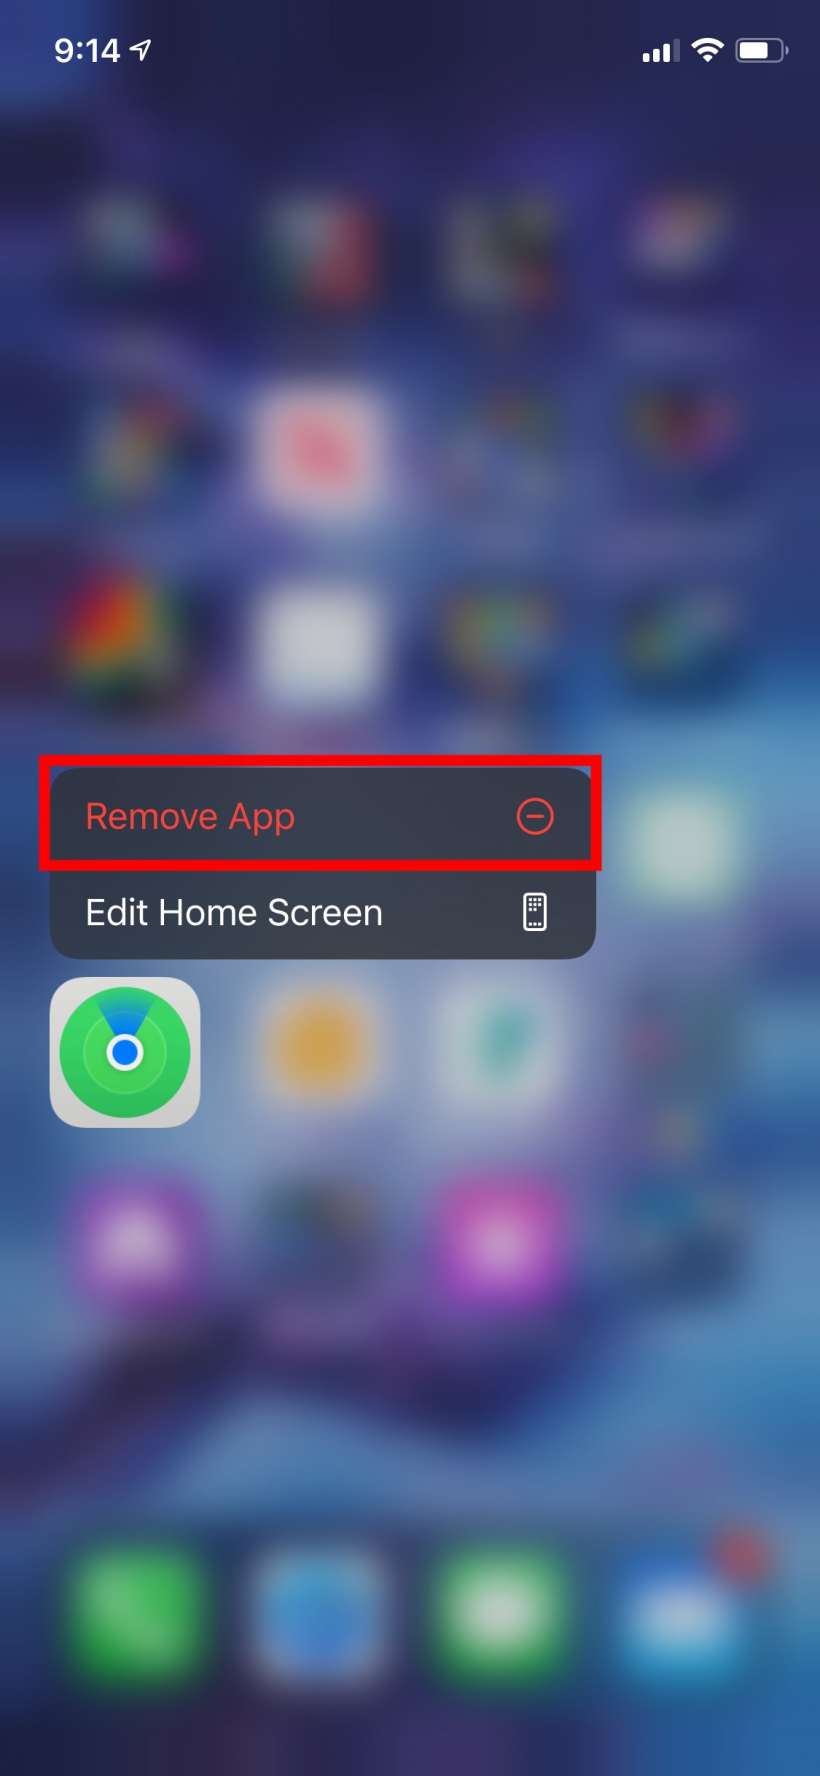 How to quickly move apps from Home Screen to App Library on iPhone.